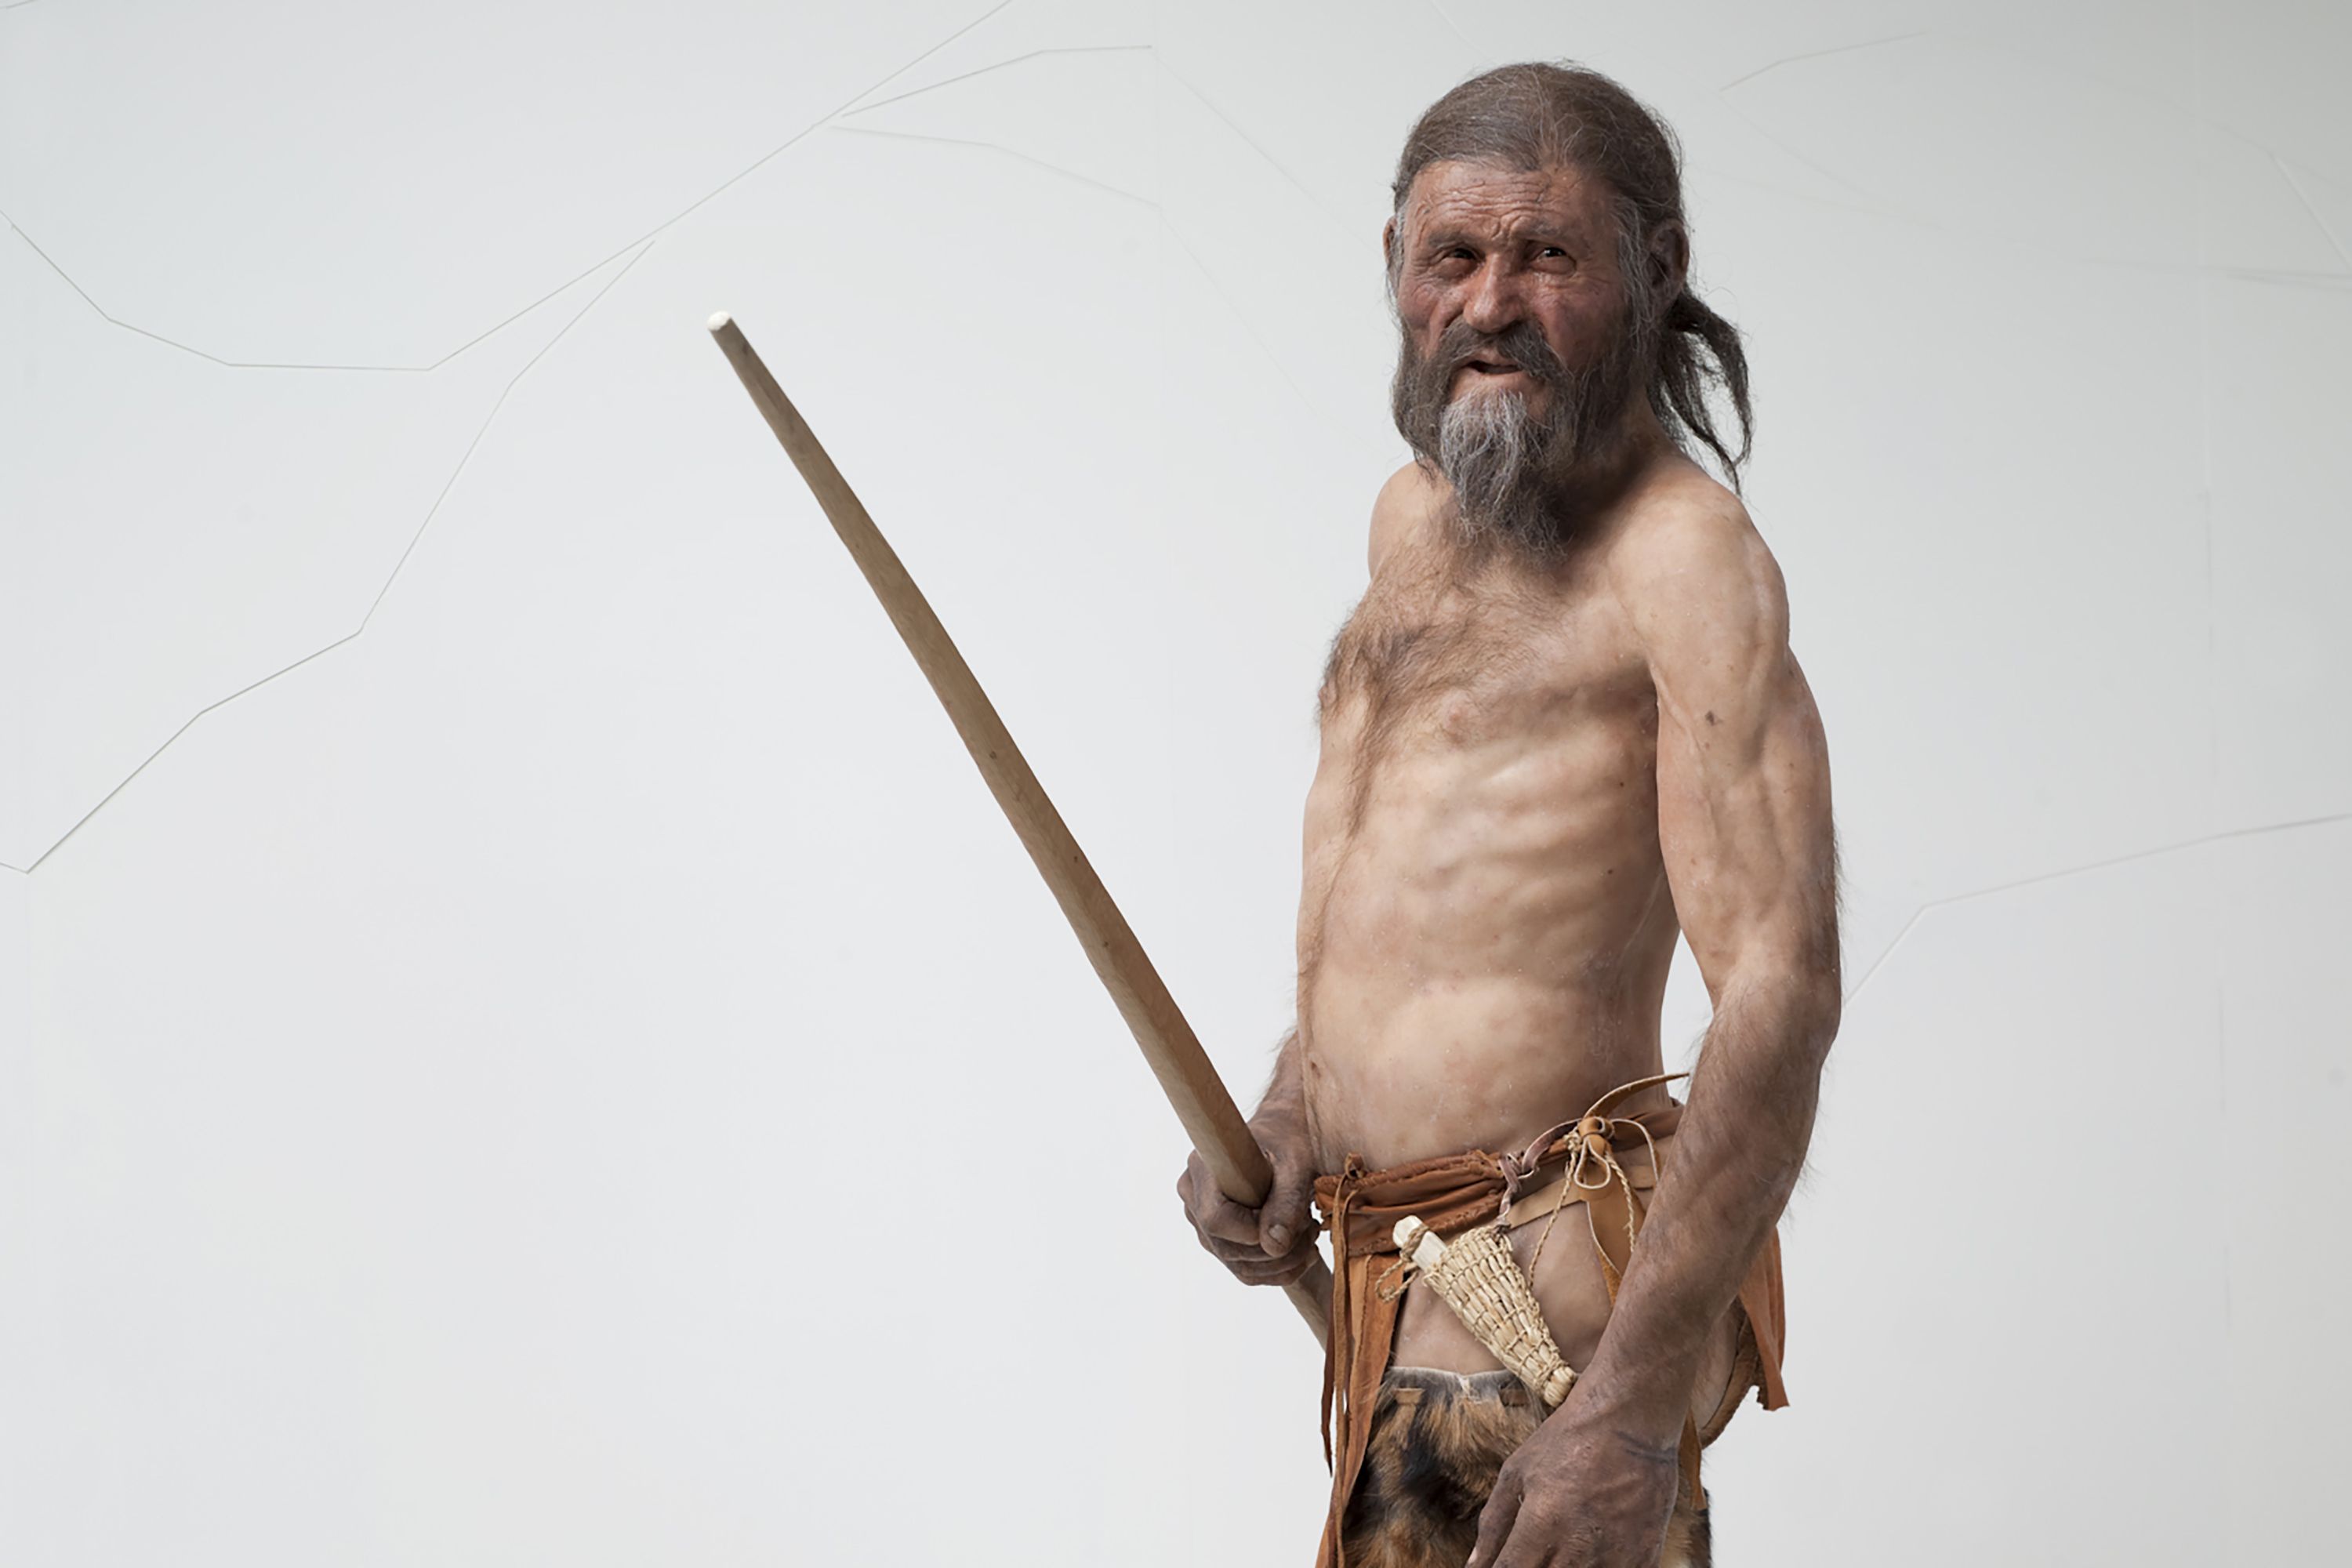 New Study Reveals Ötzi the Iceman's Ancestry and Male-Pattern Baldness